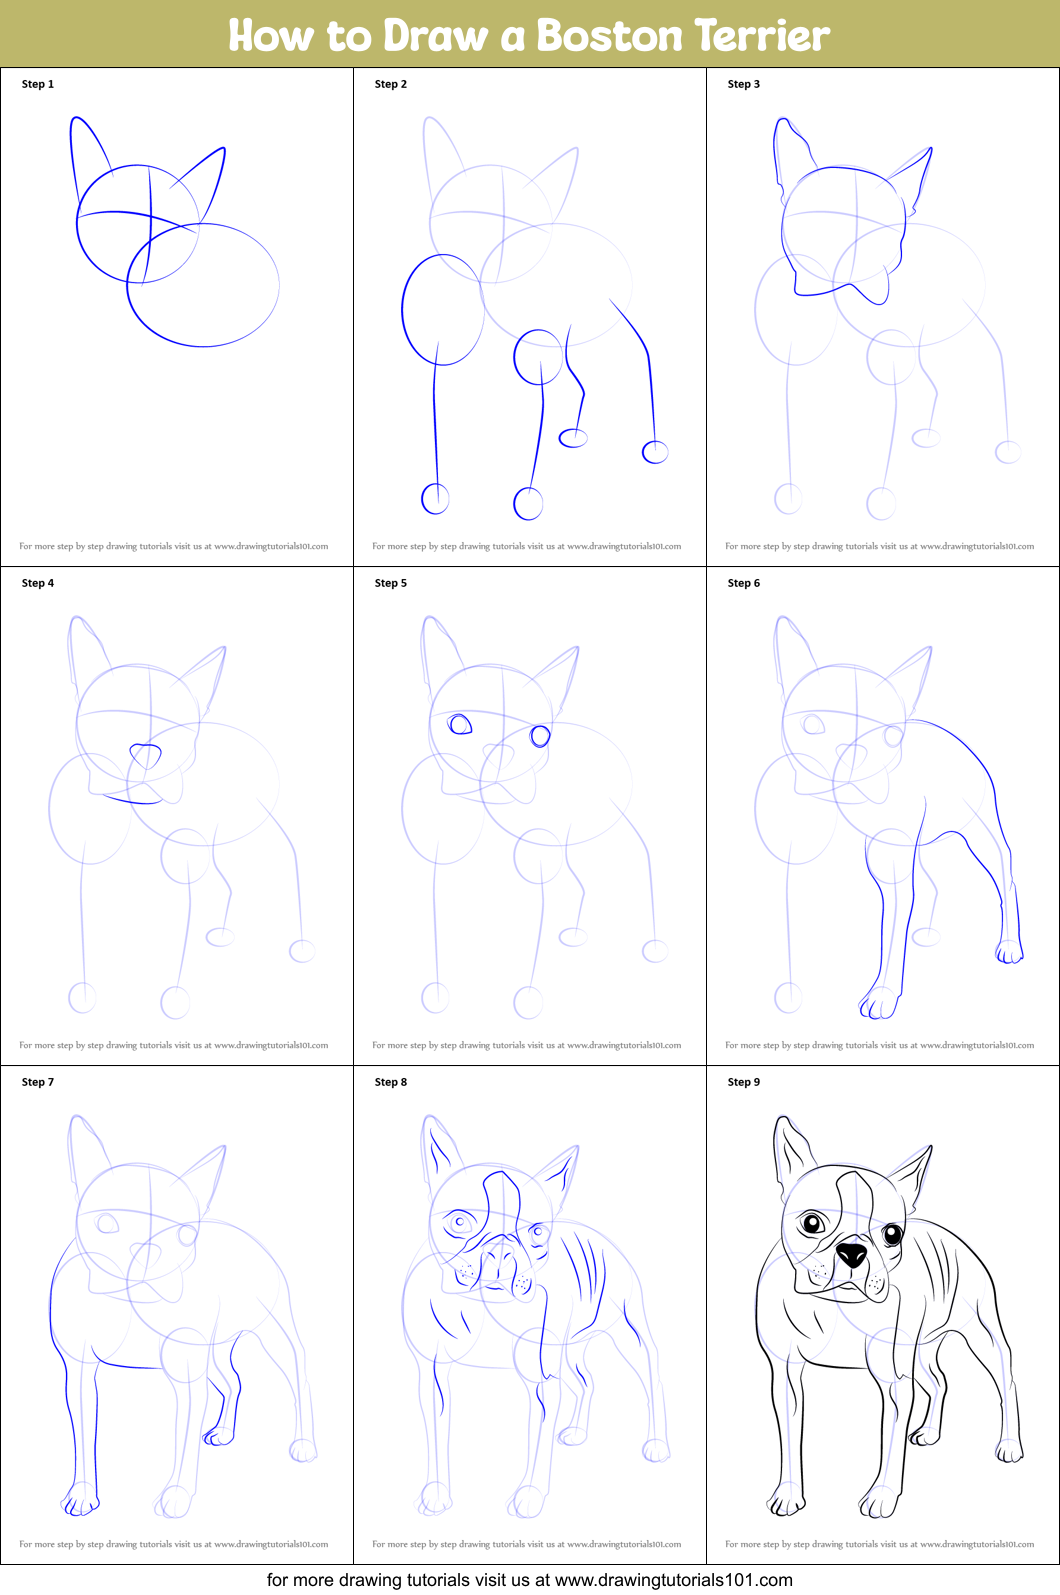 How to Draw a Boston Terrier printable step by step drawing sheet